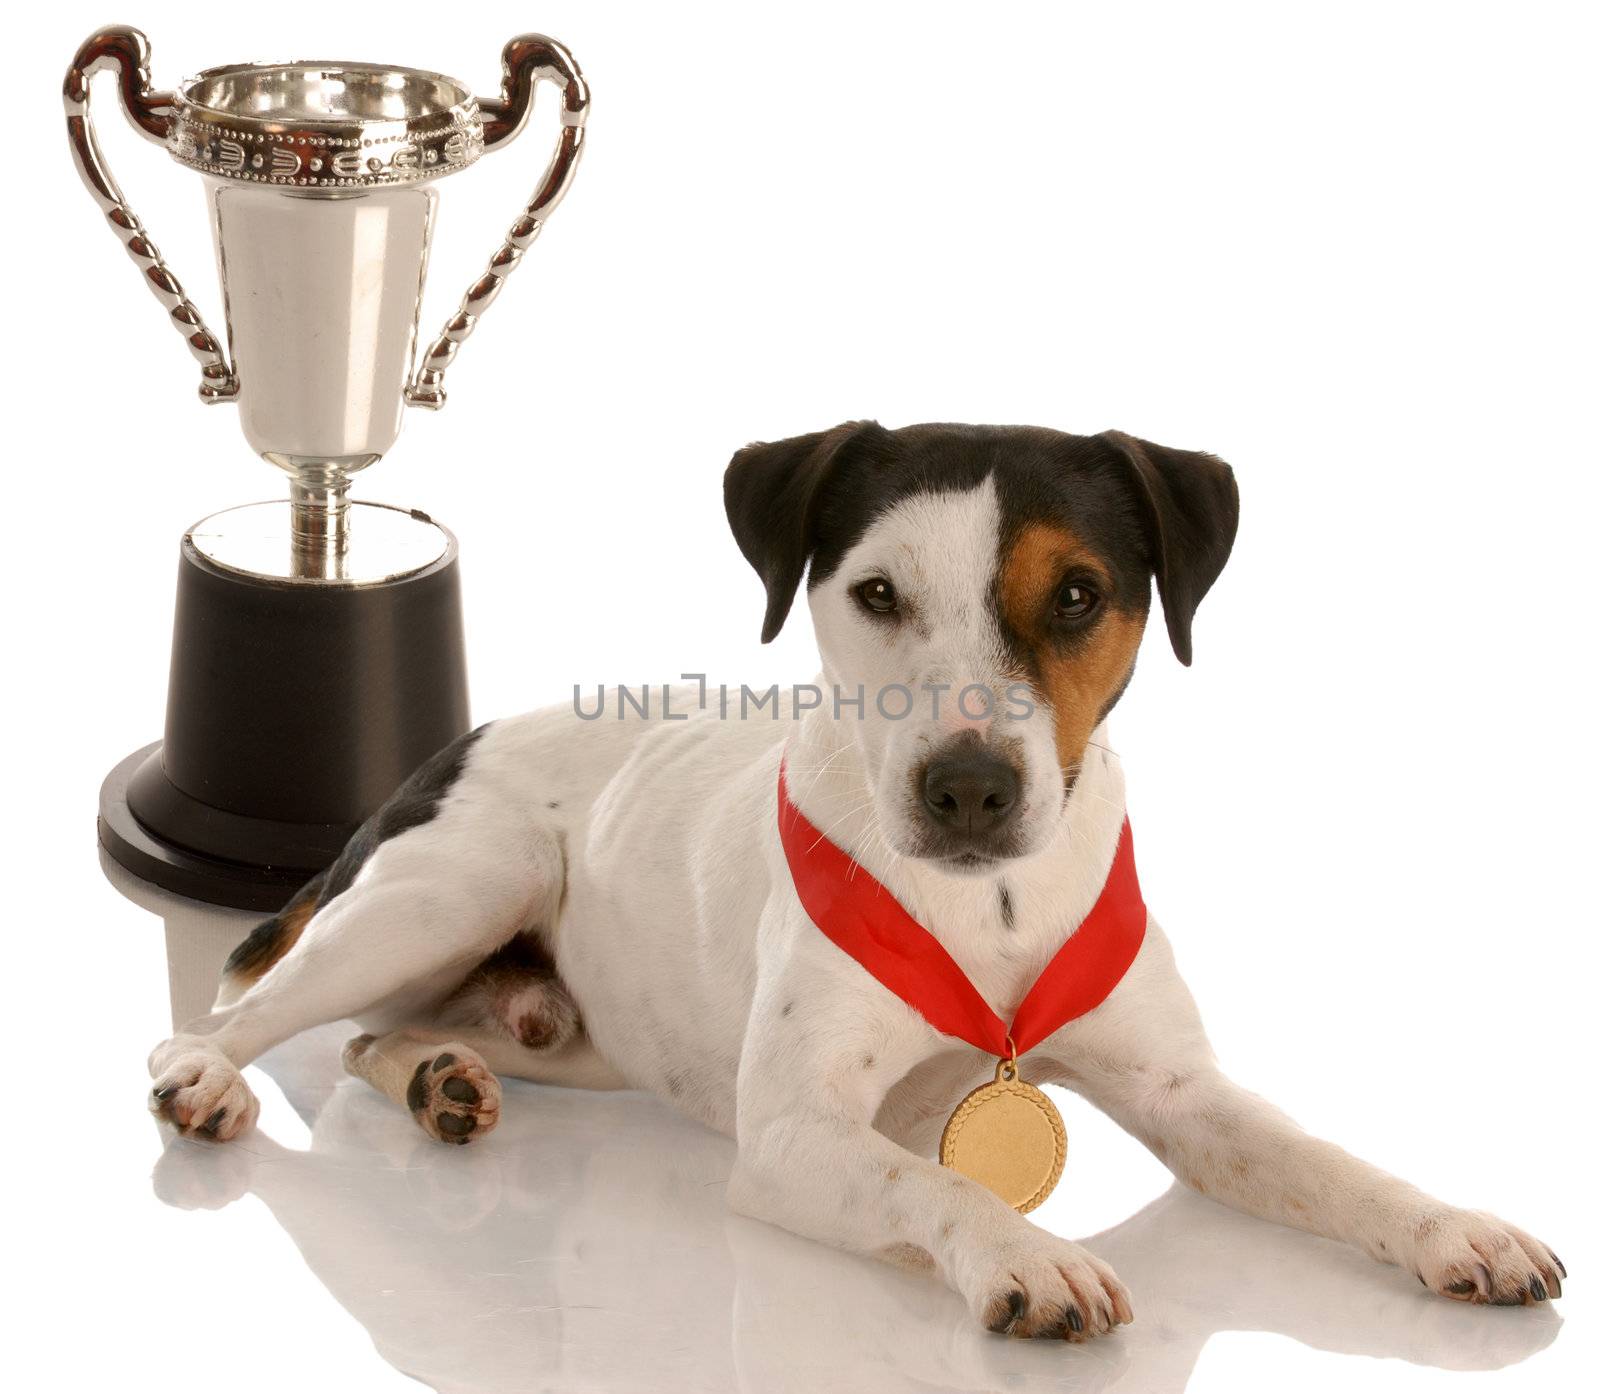 champion dog - jack russel terrier wearing gold medal sitting with trophy